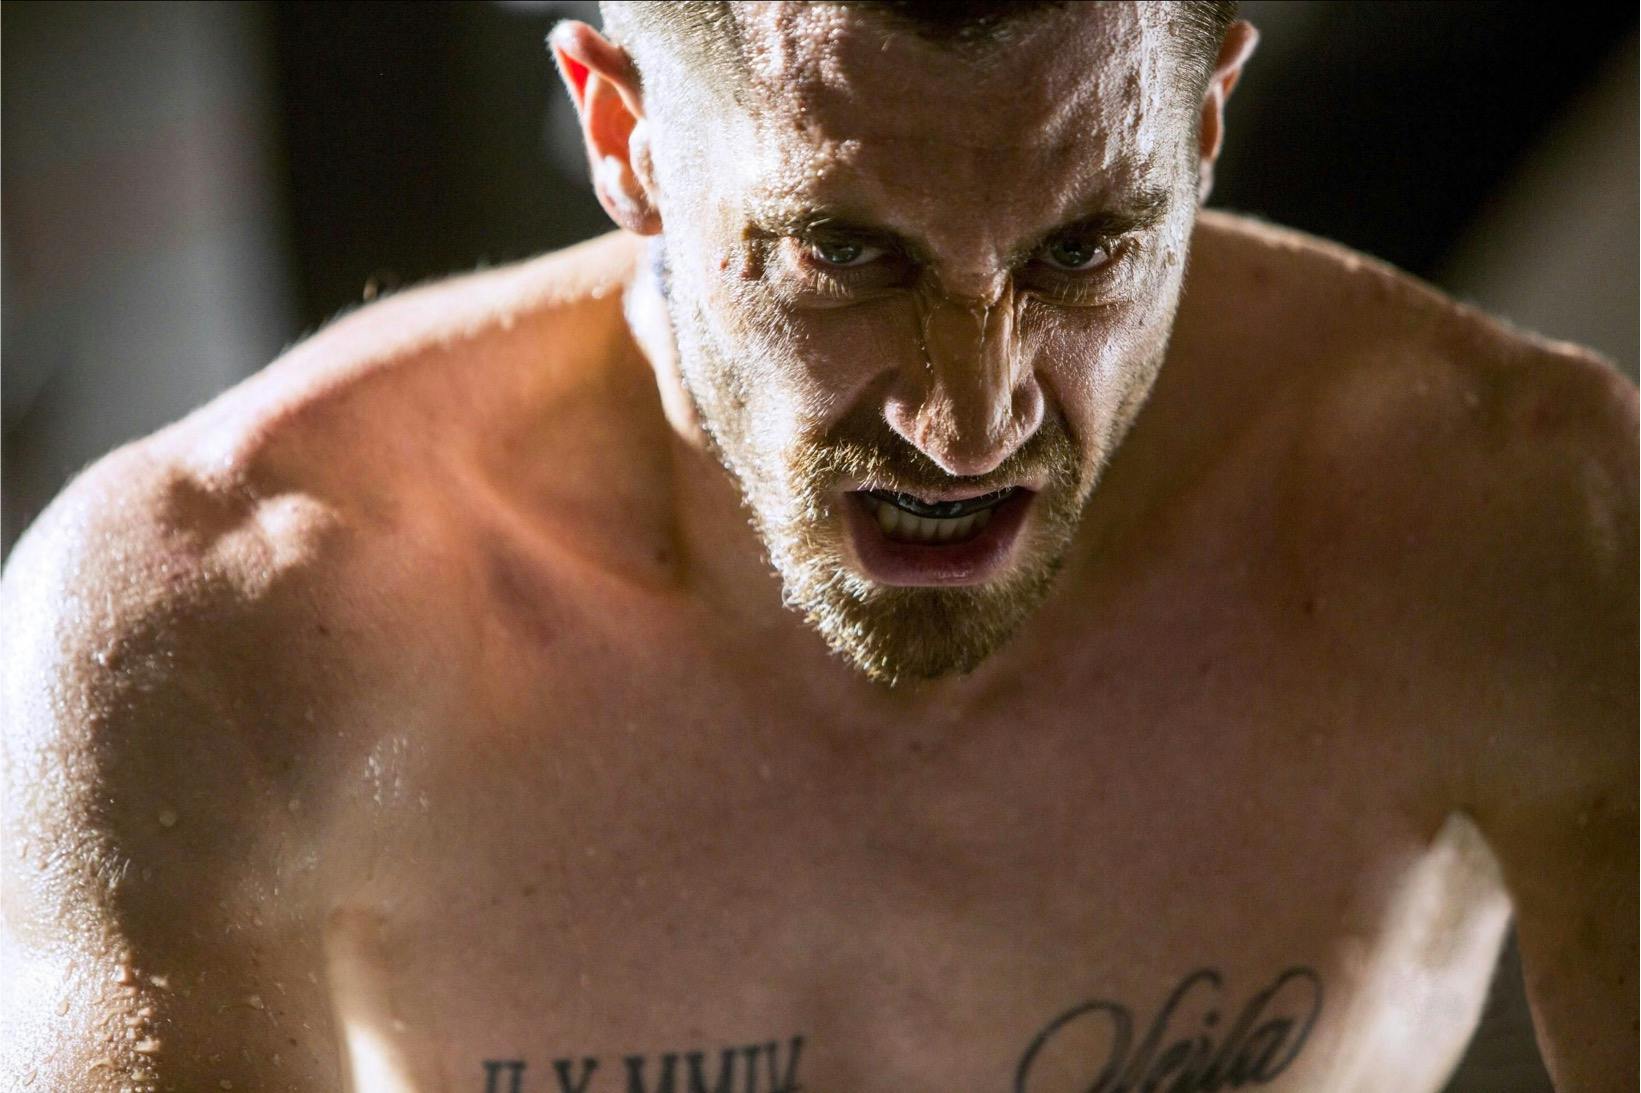 Billy Hope (Jake Gyllenhaal) in Southpaw (2015) looks intense in this close-up scene. His chest is tattooed, he wears a mouthguard, and his hair is light.